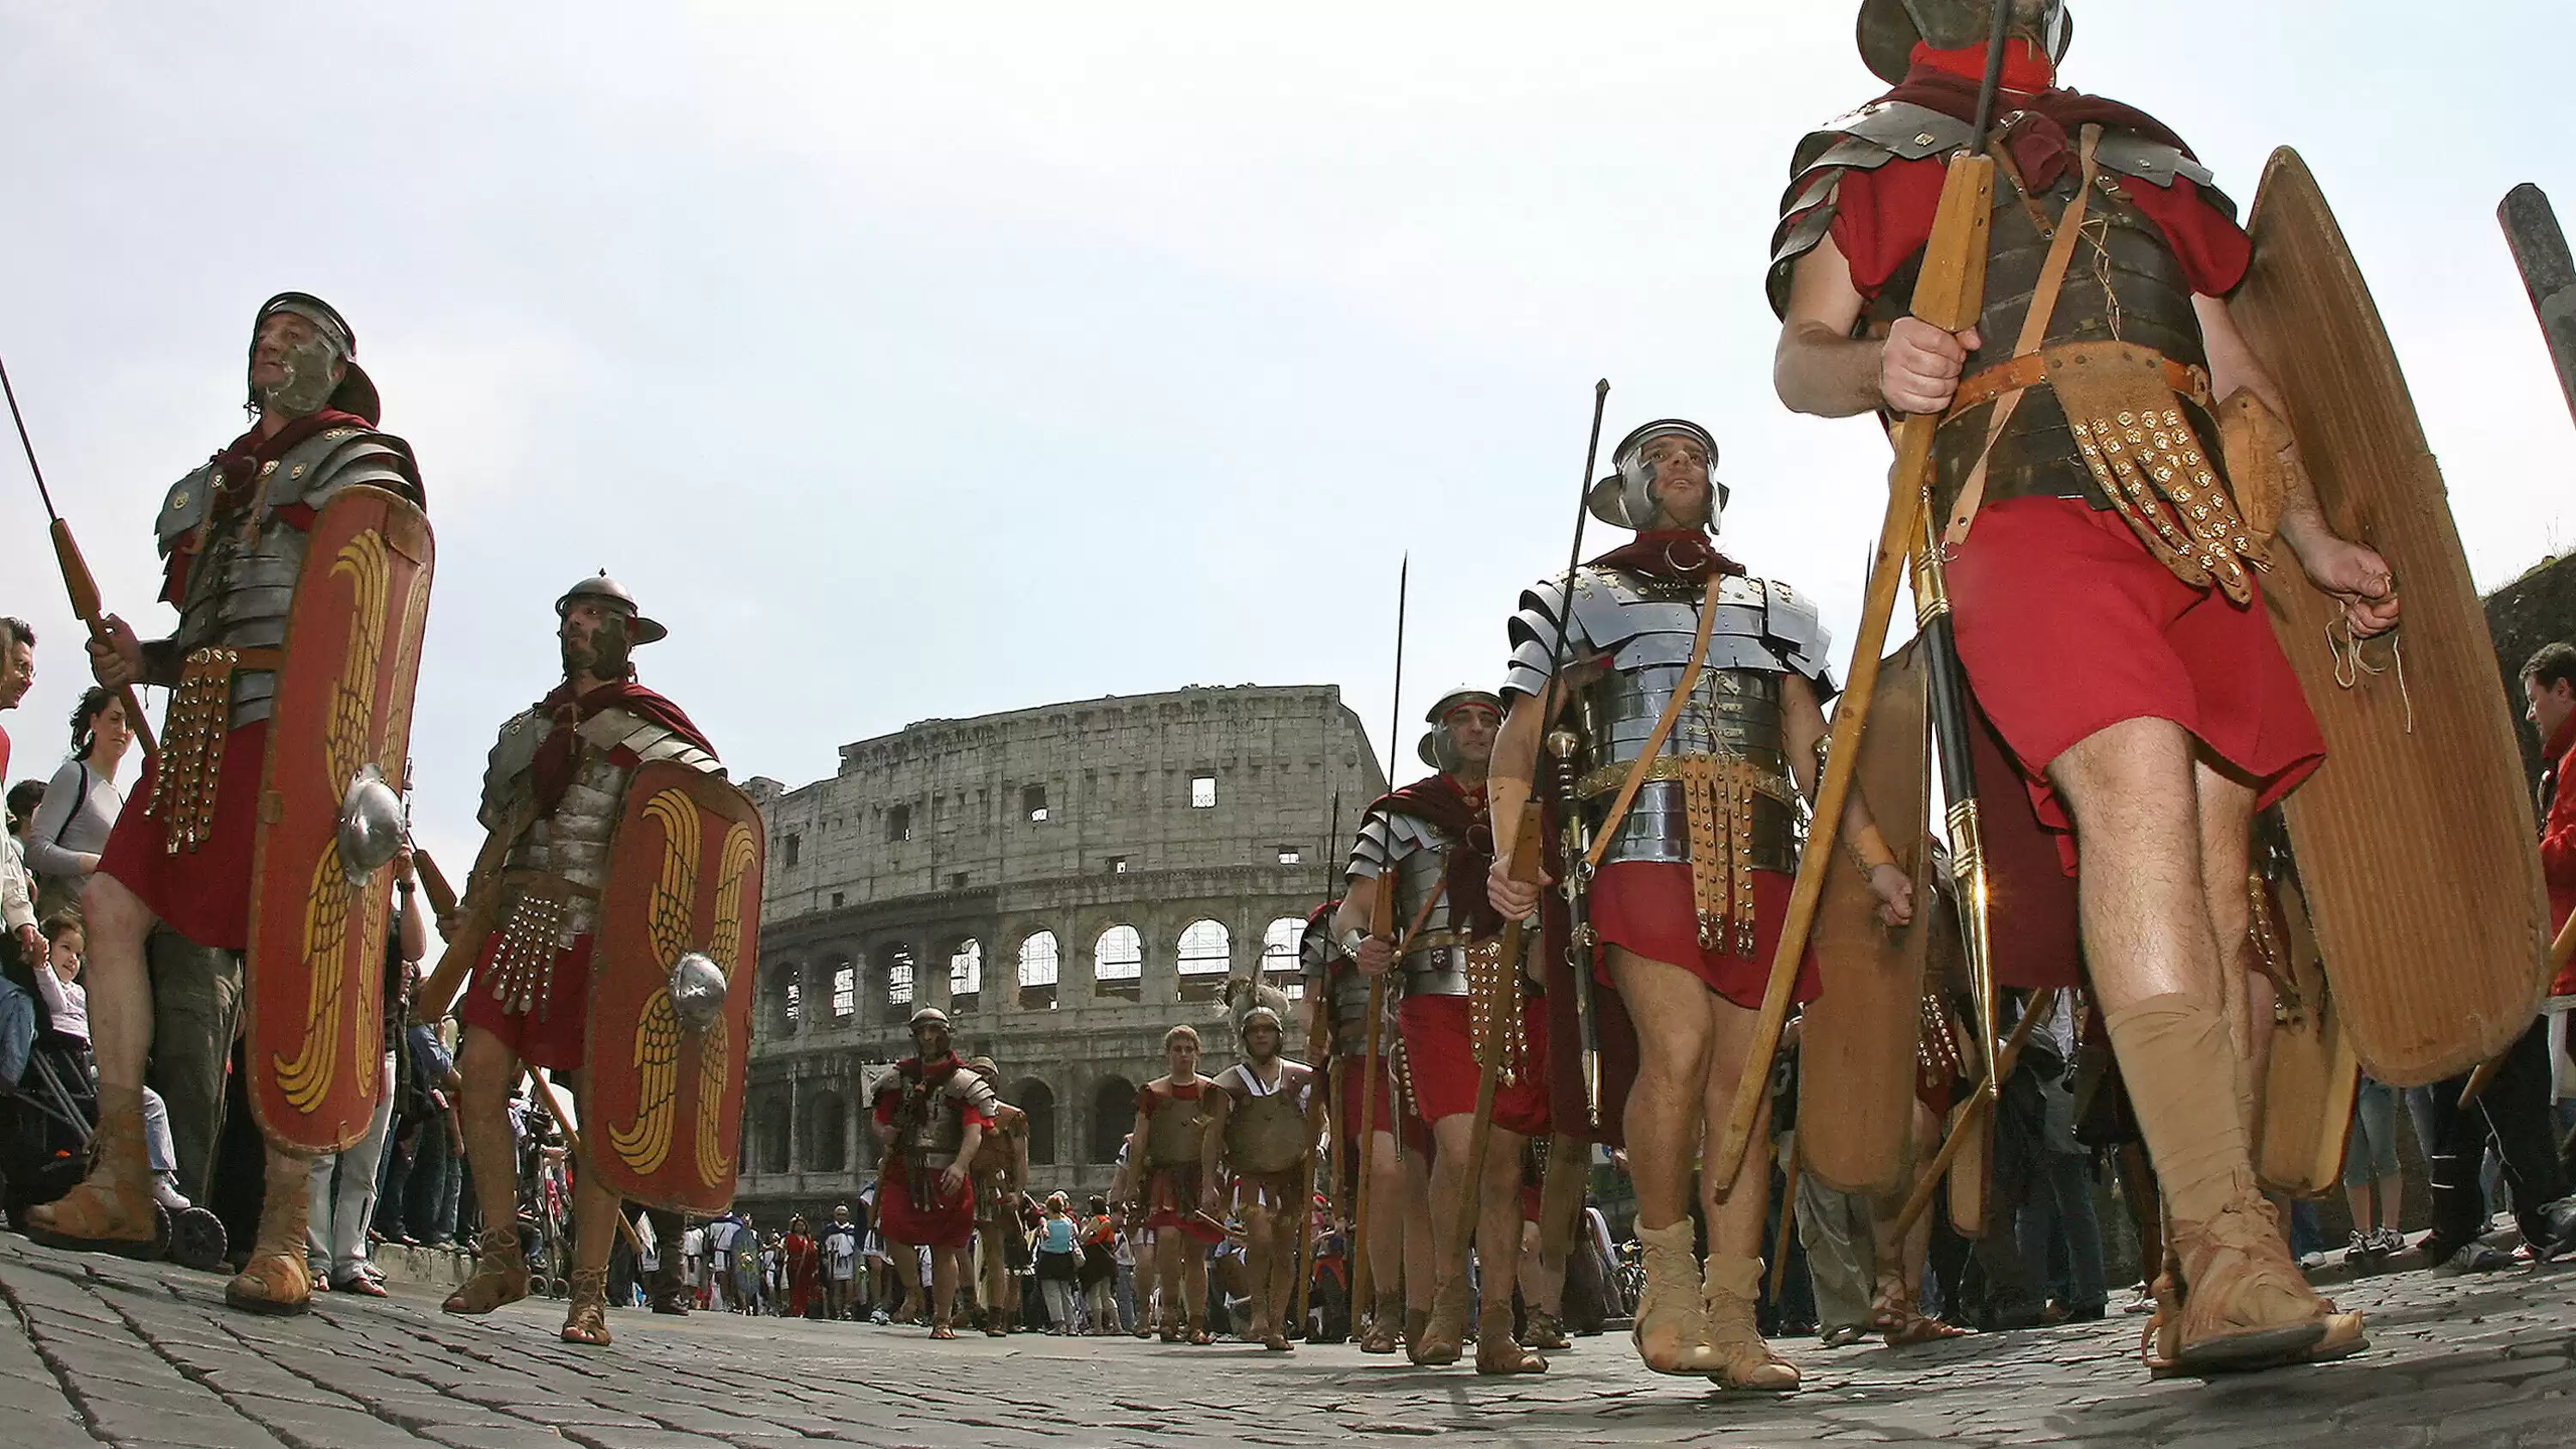 "Men's Fascination With the Roman Empire: Opinion Divide Persists"